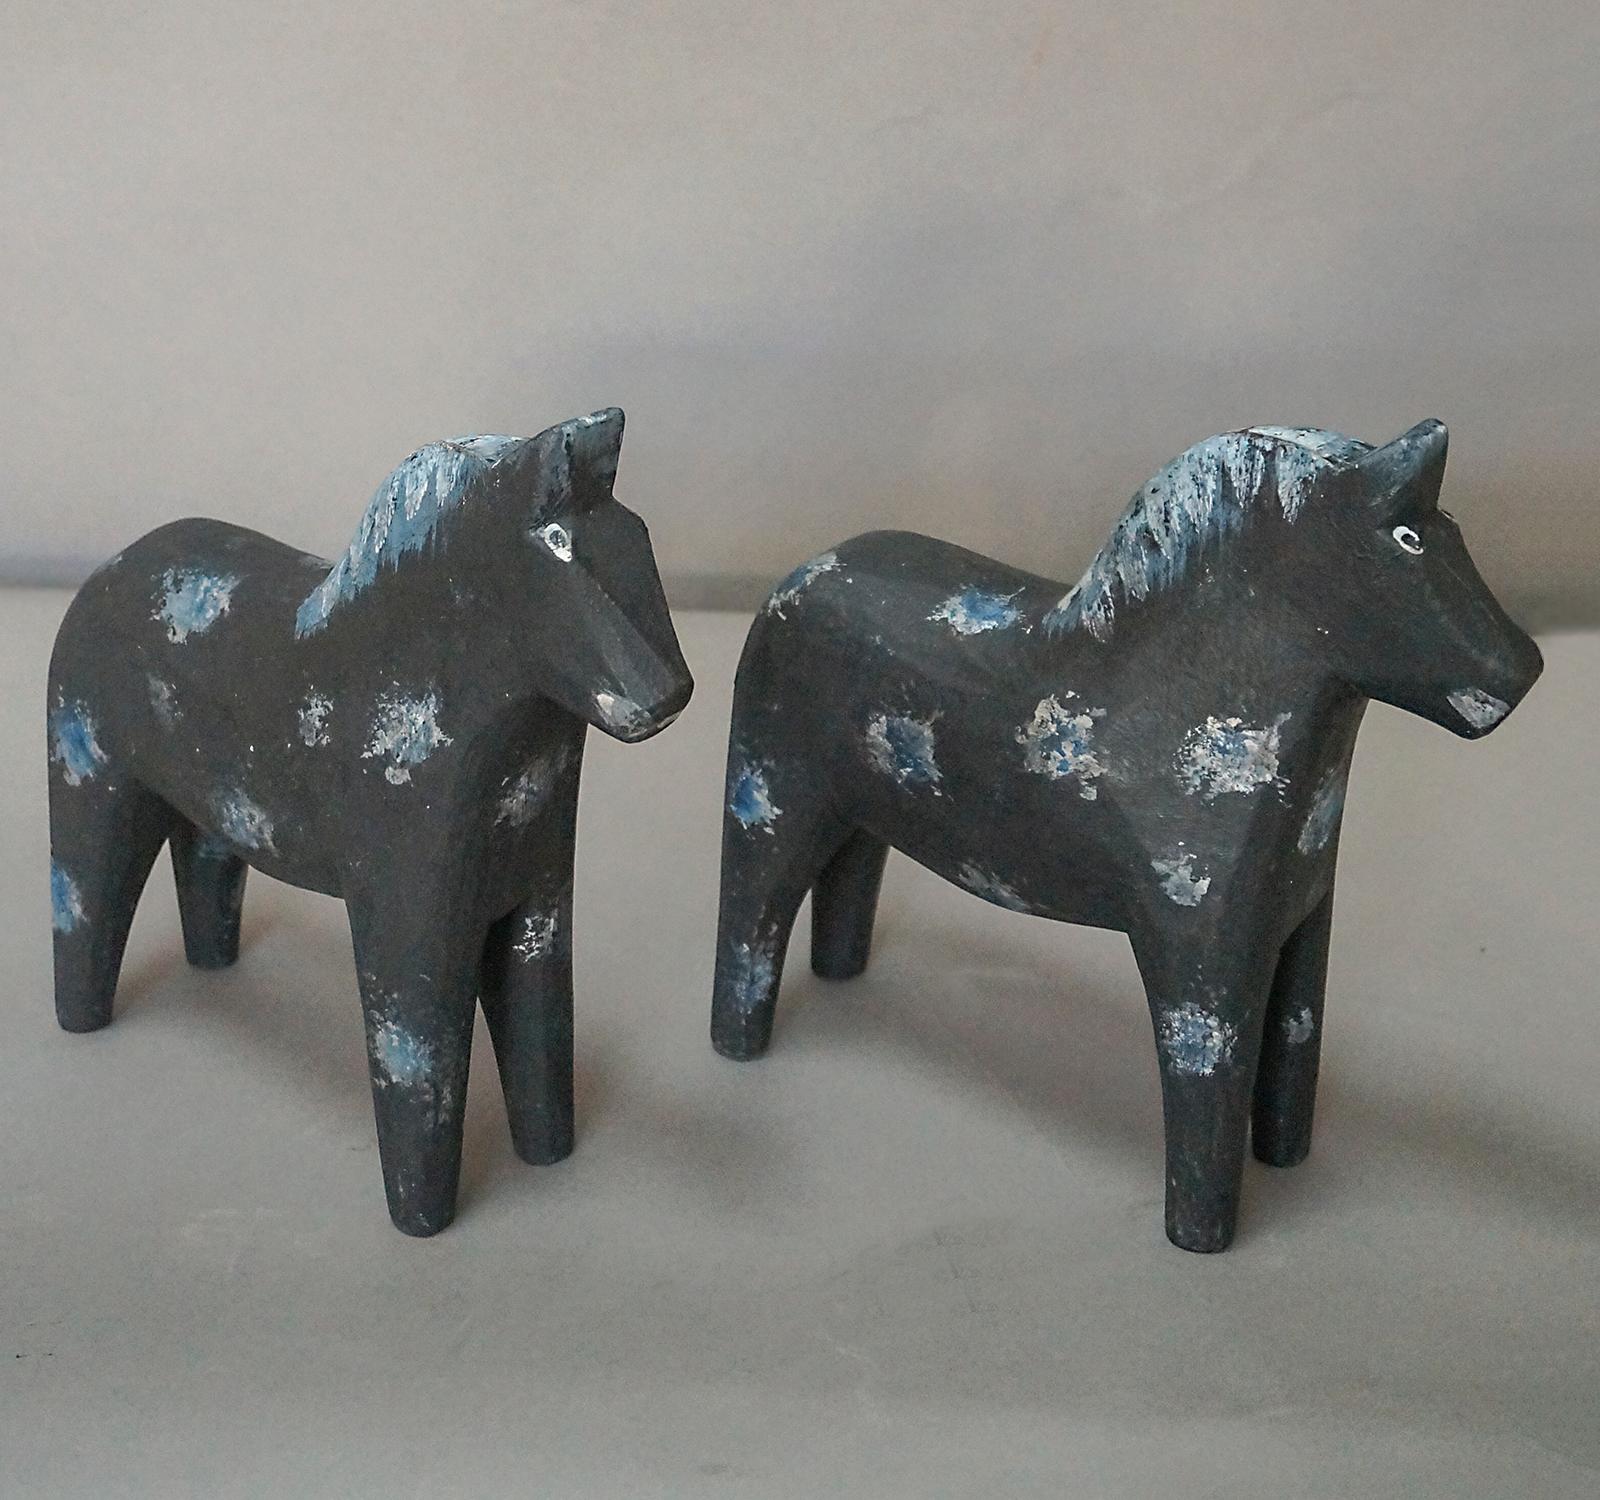 Pair of hand carved Dala horses, Sweden circa 1910, in black paint. Great expressions on these.